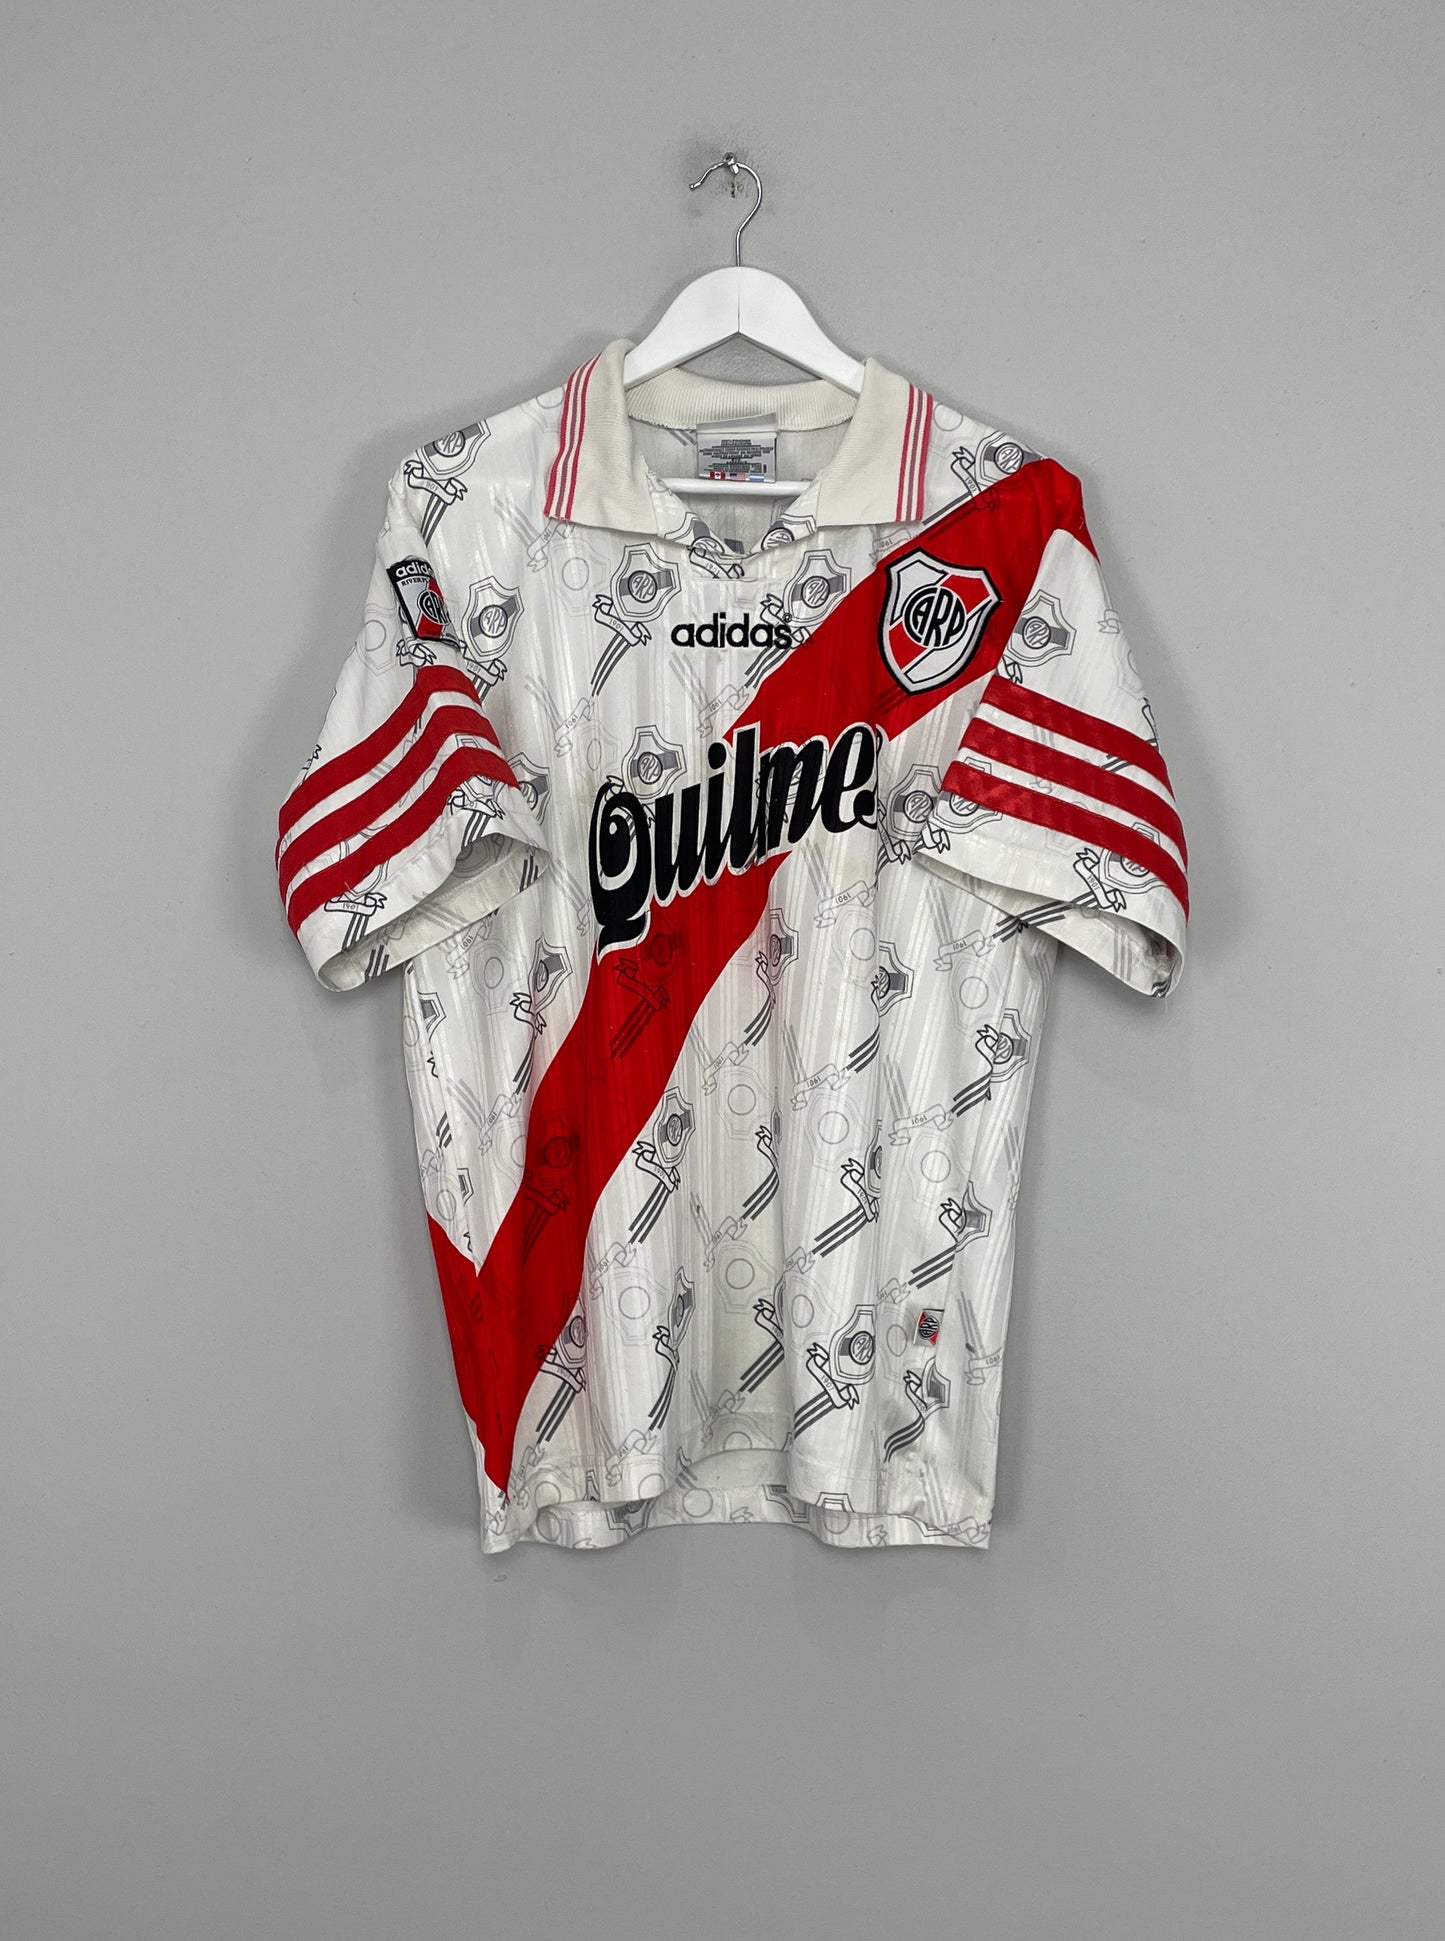 Image of the River Plate from the 1996/98 season